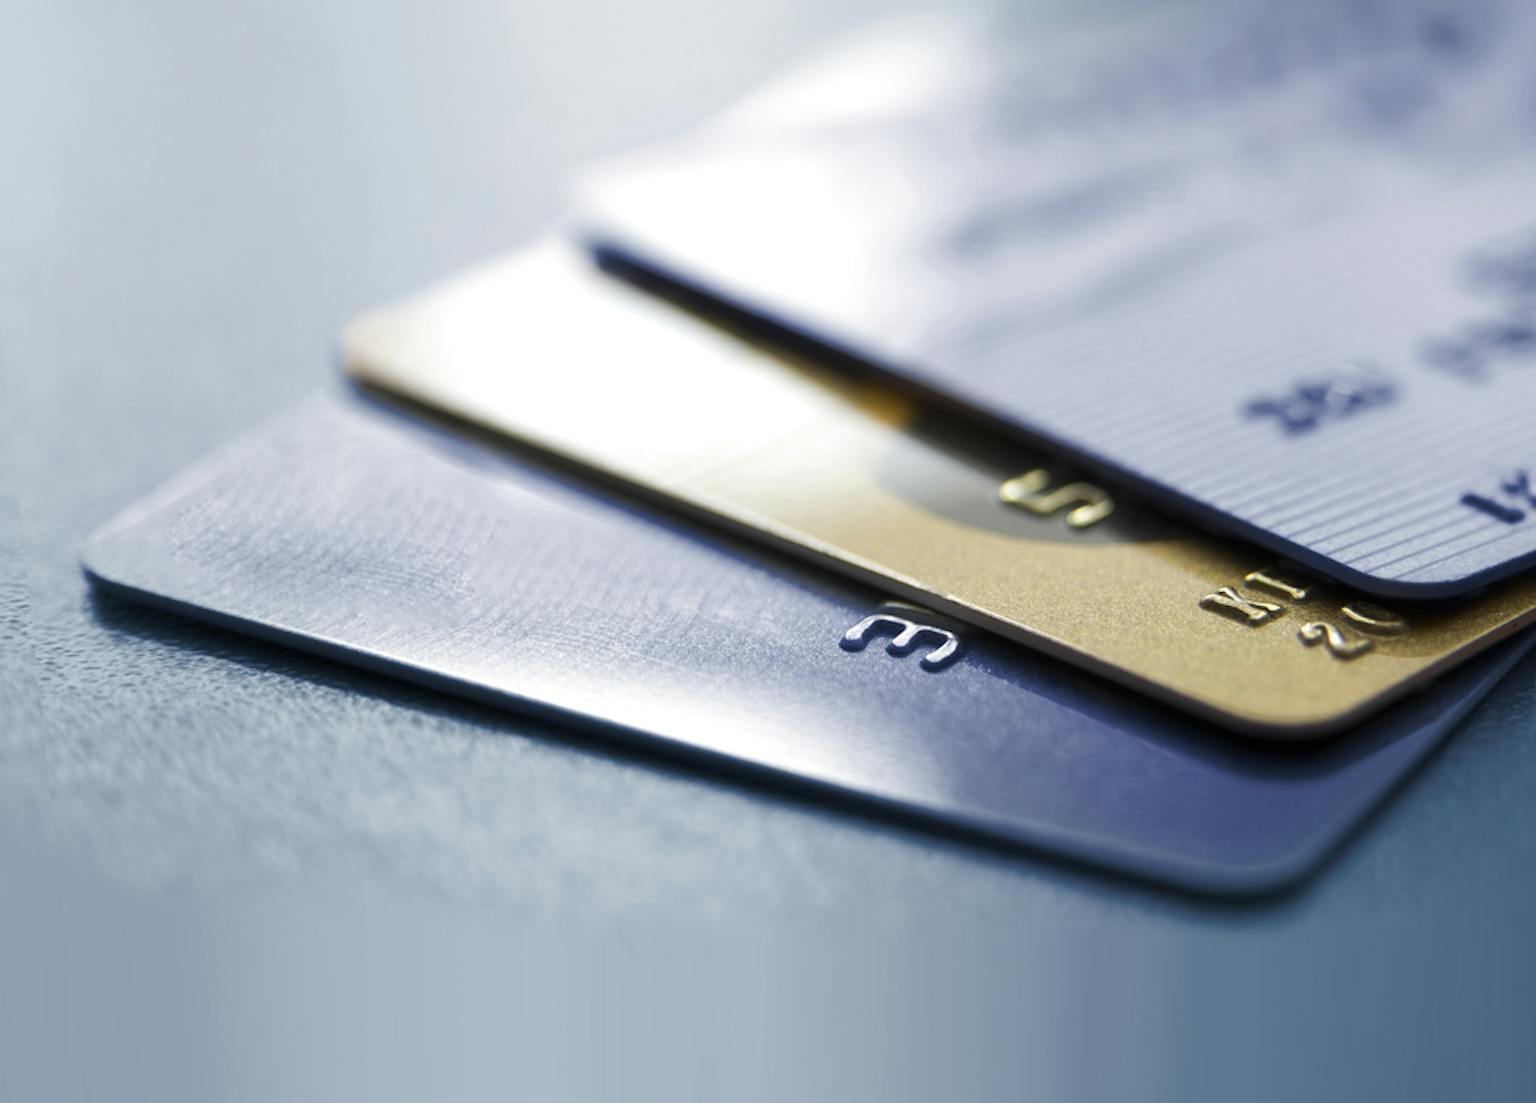 Top 5 Most Expensive and Prestigious Credit Cards in Singapore